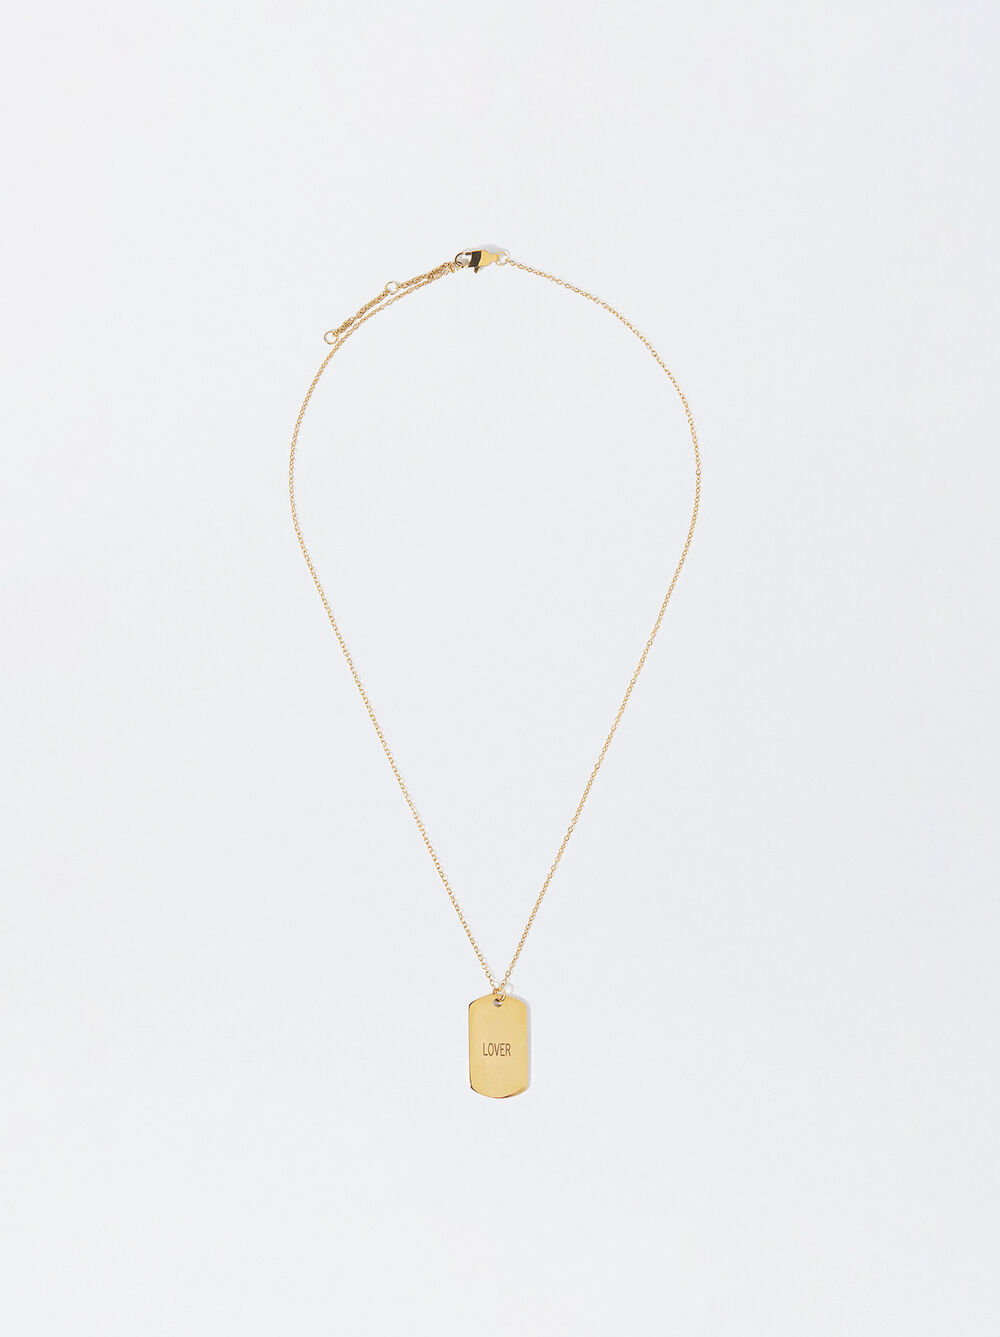 Online Exclusive - Gold Stainless Steel Necklace With Personalized Pendant